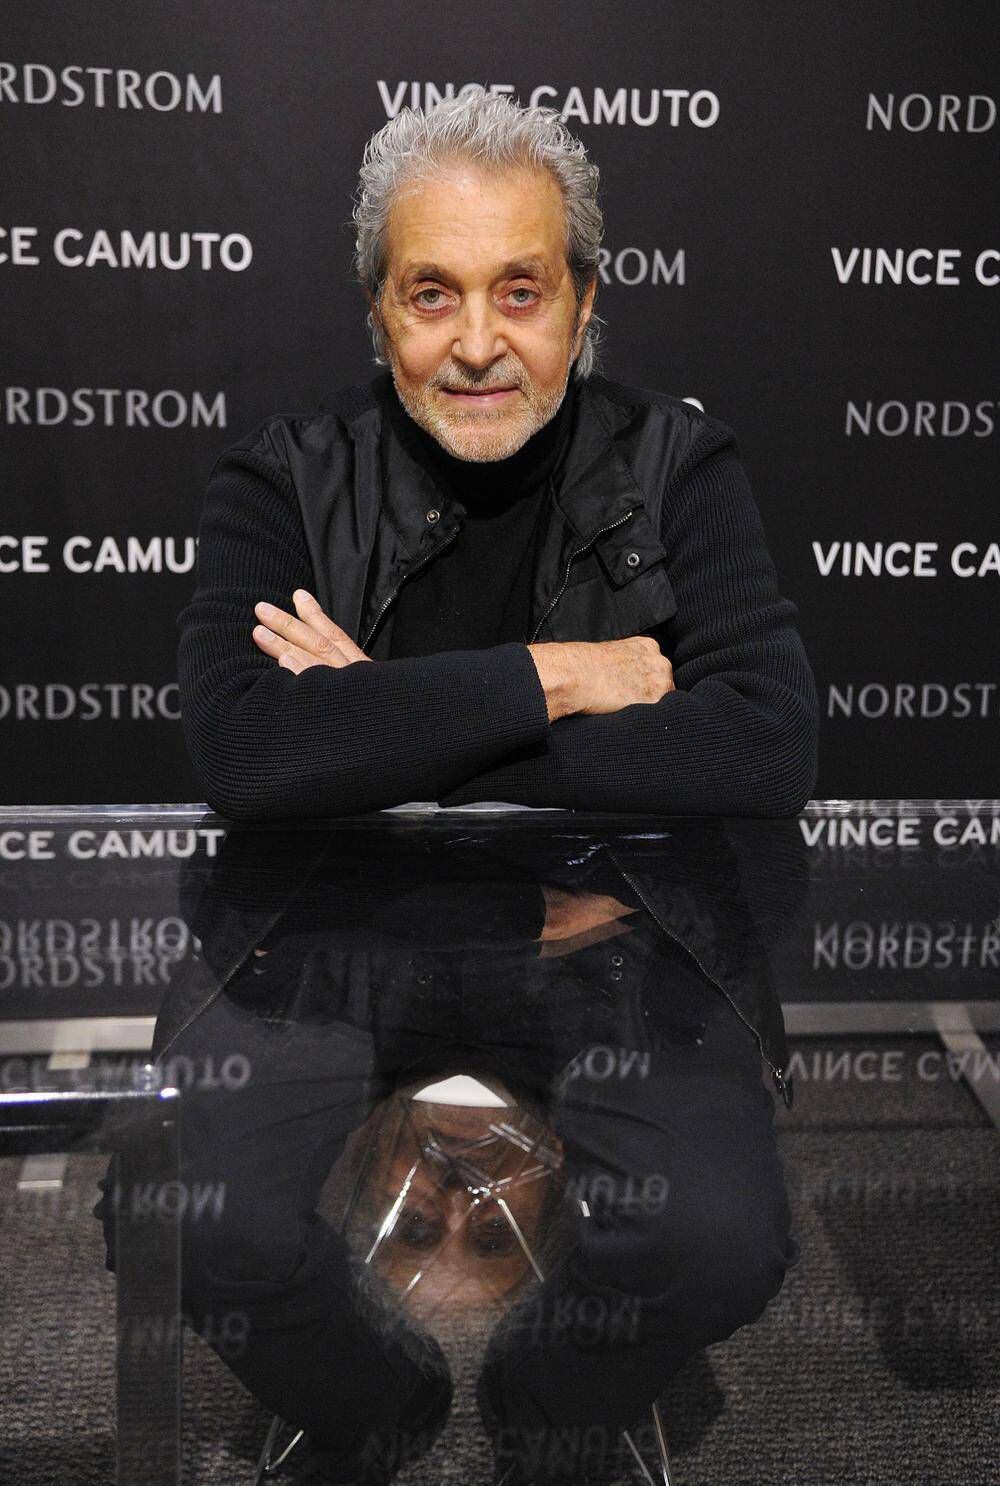 Vince Camuto memorial service: Mourners remember legendary shoe